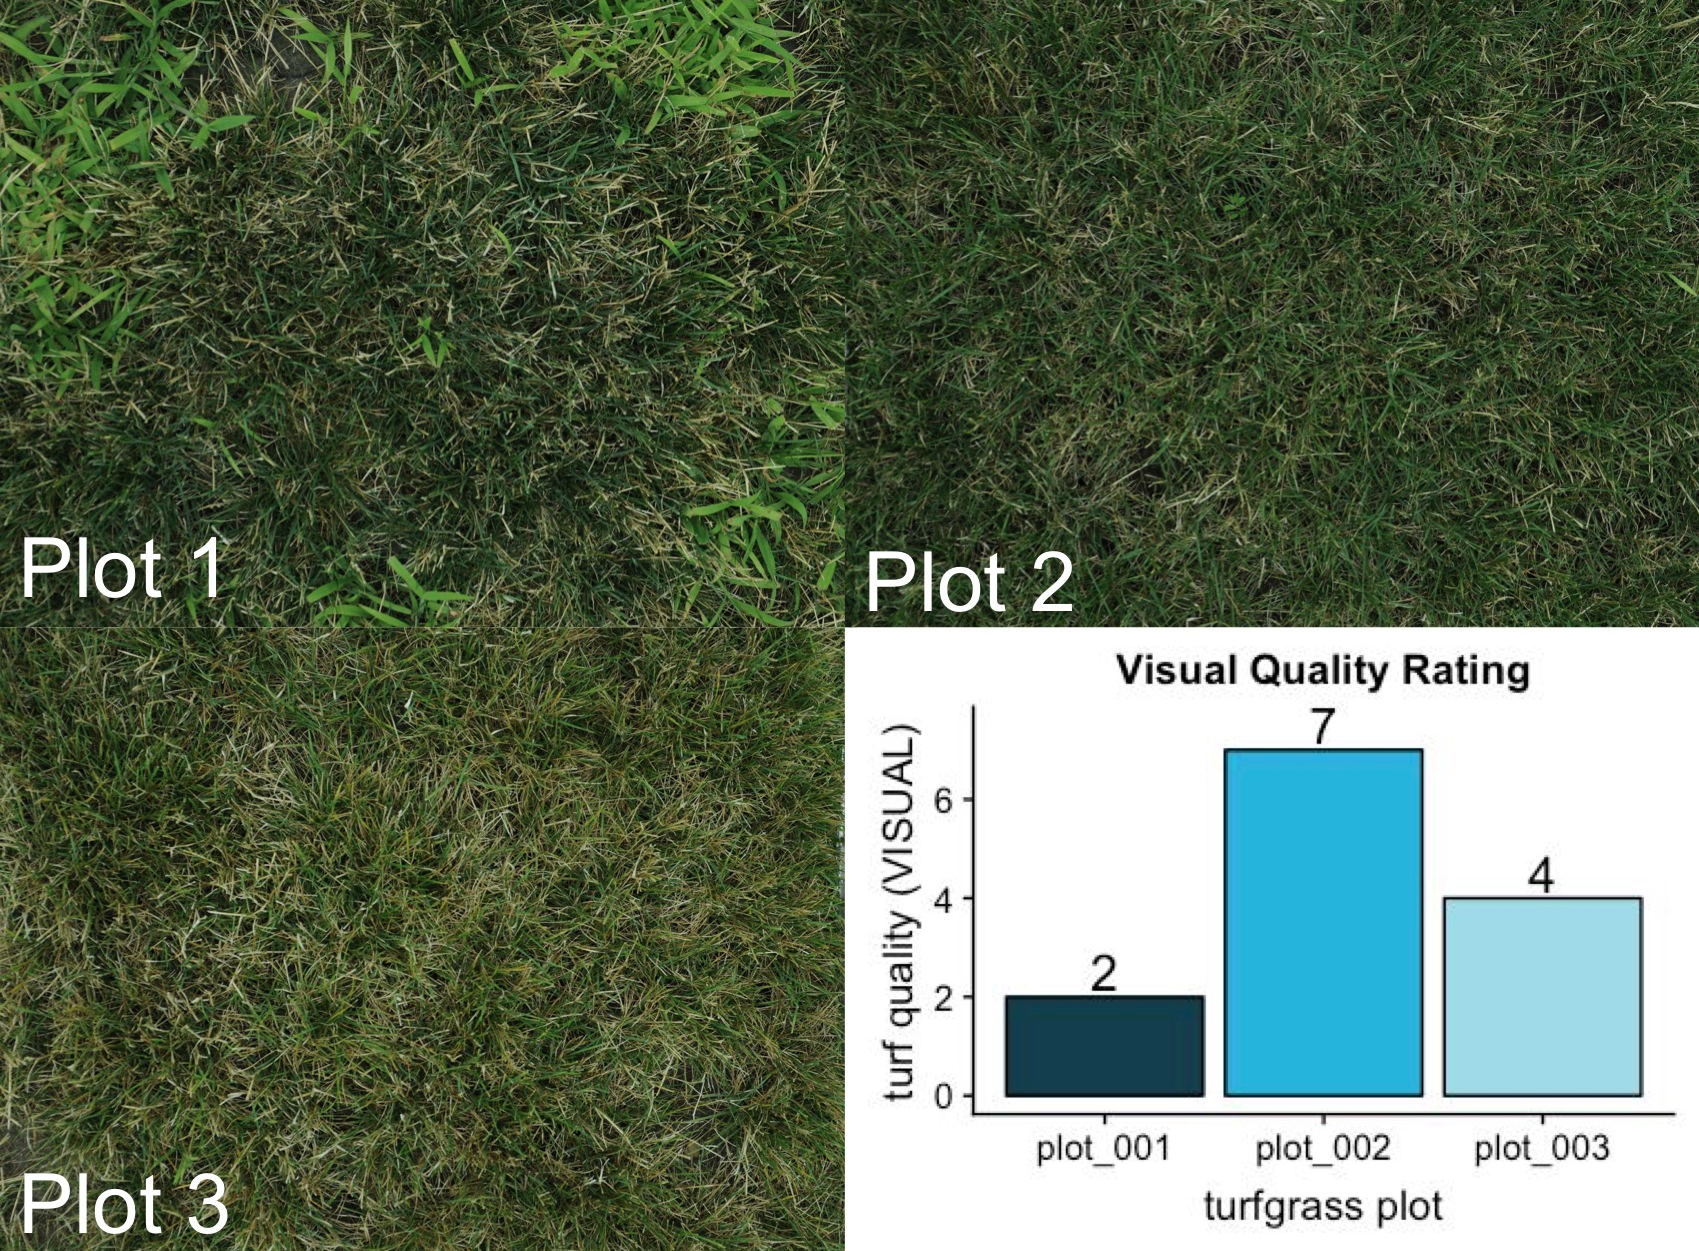 three perennial ryegrass plots of varying visual quality and one graph with the ratings of each of the plots